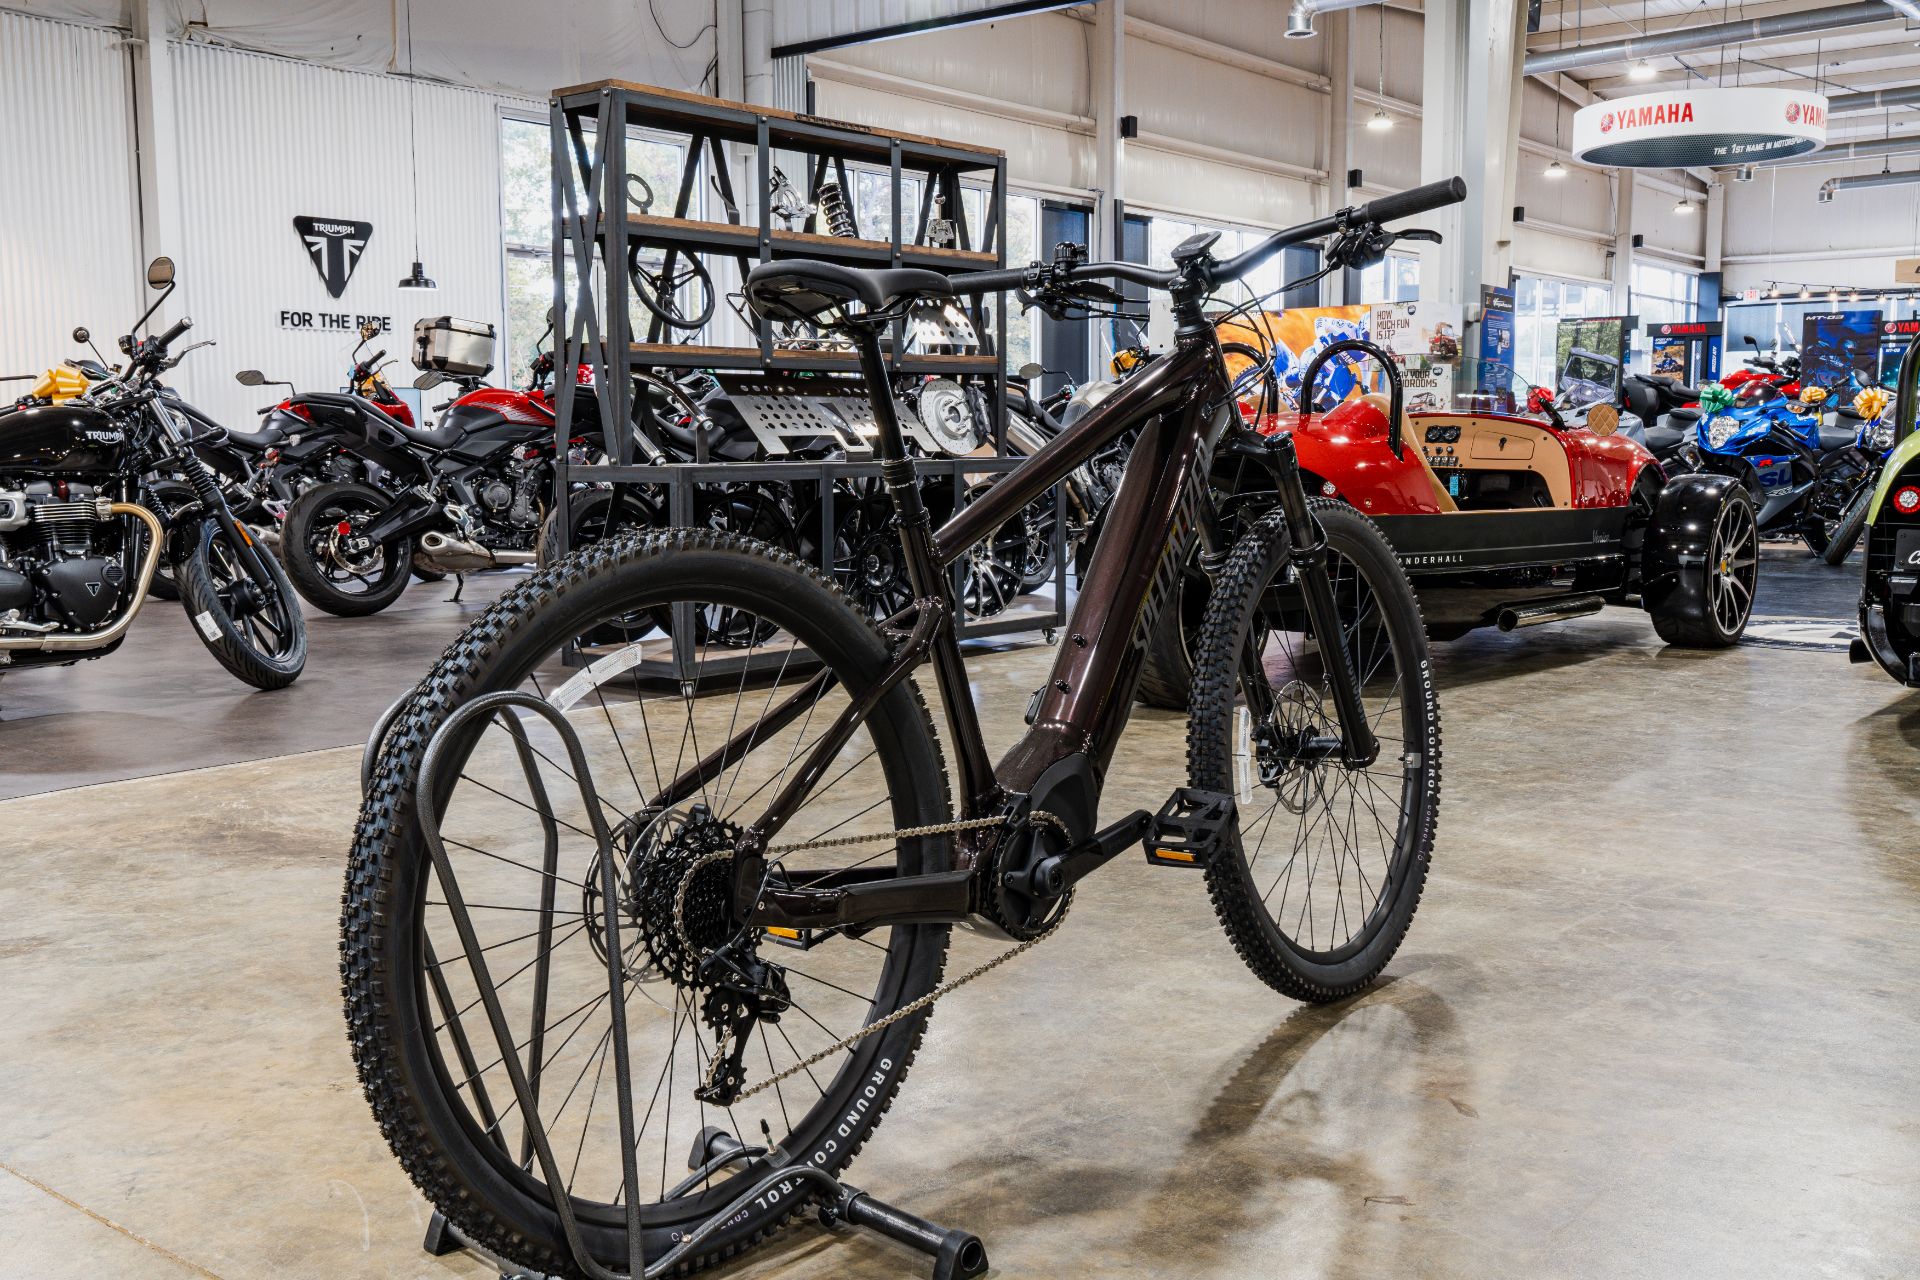 2022 Specialized Bicycle Components, Inc. TERO 5.0 in Byron, Georgia - Photo 3